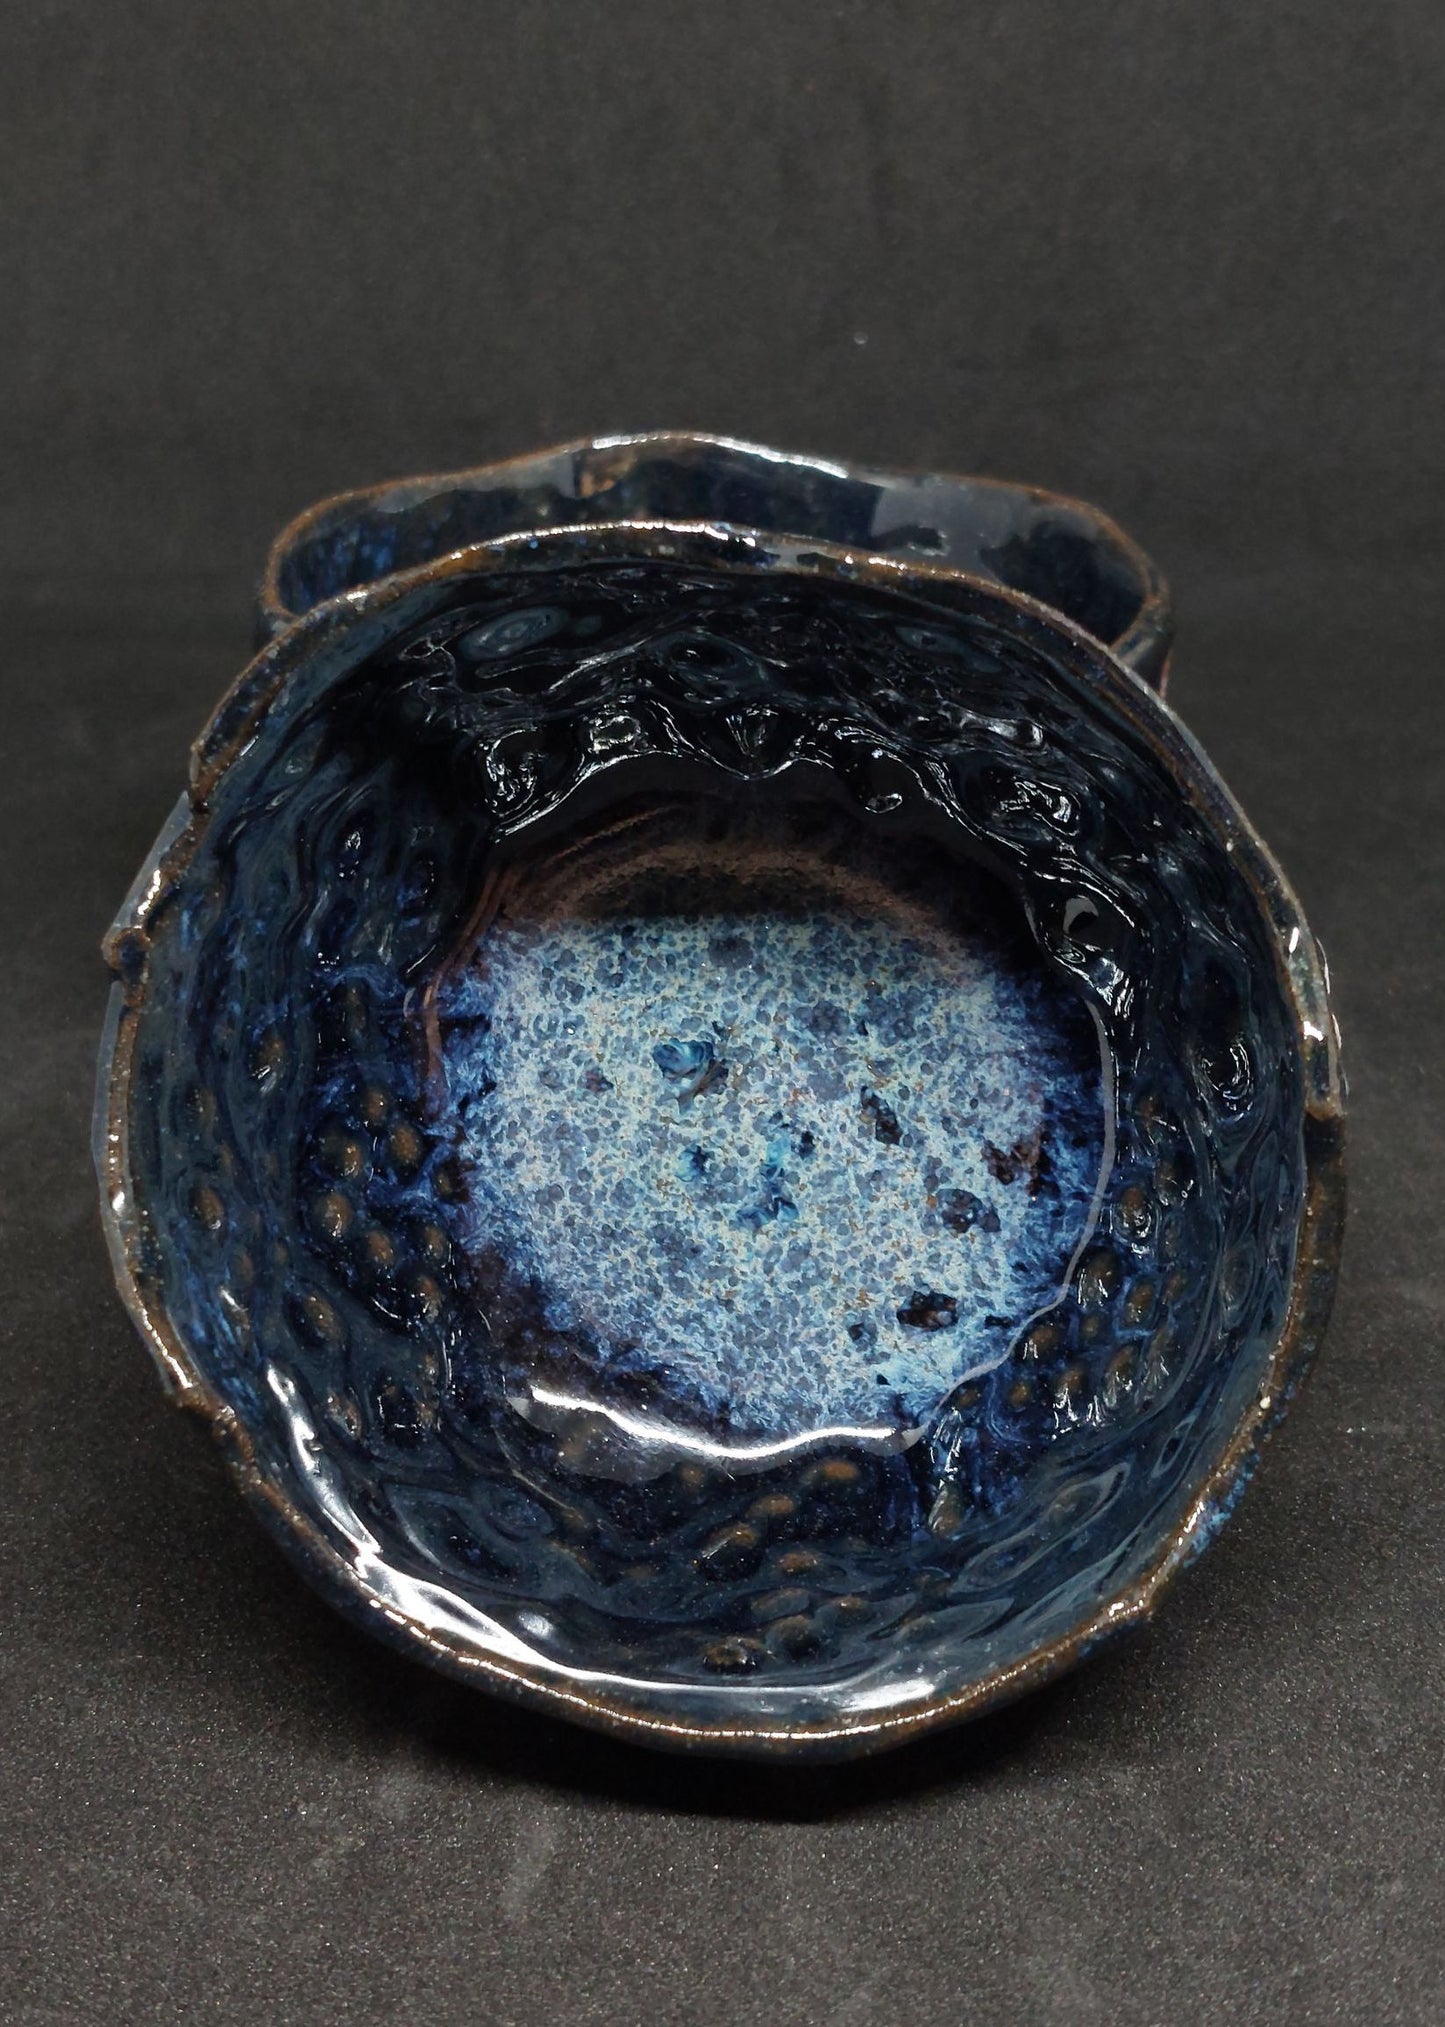 Blue cups on black and red clays - flower patterns